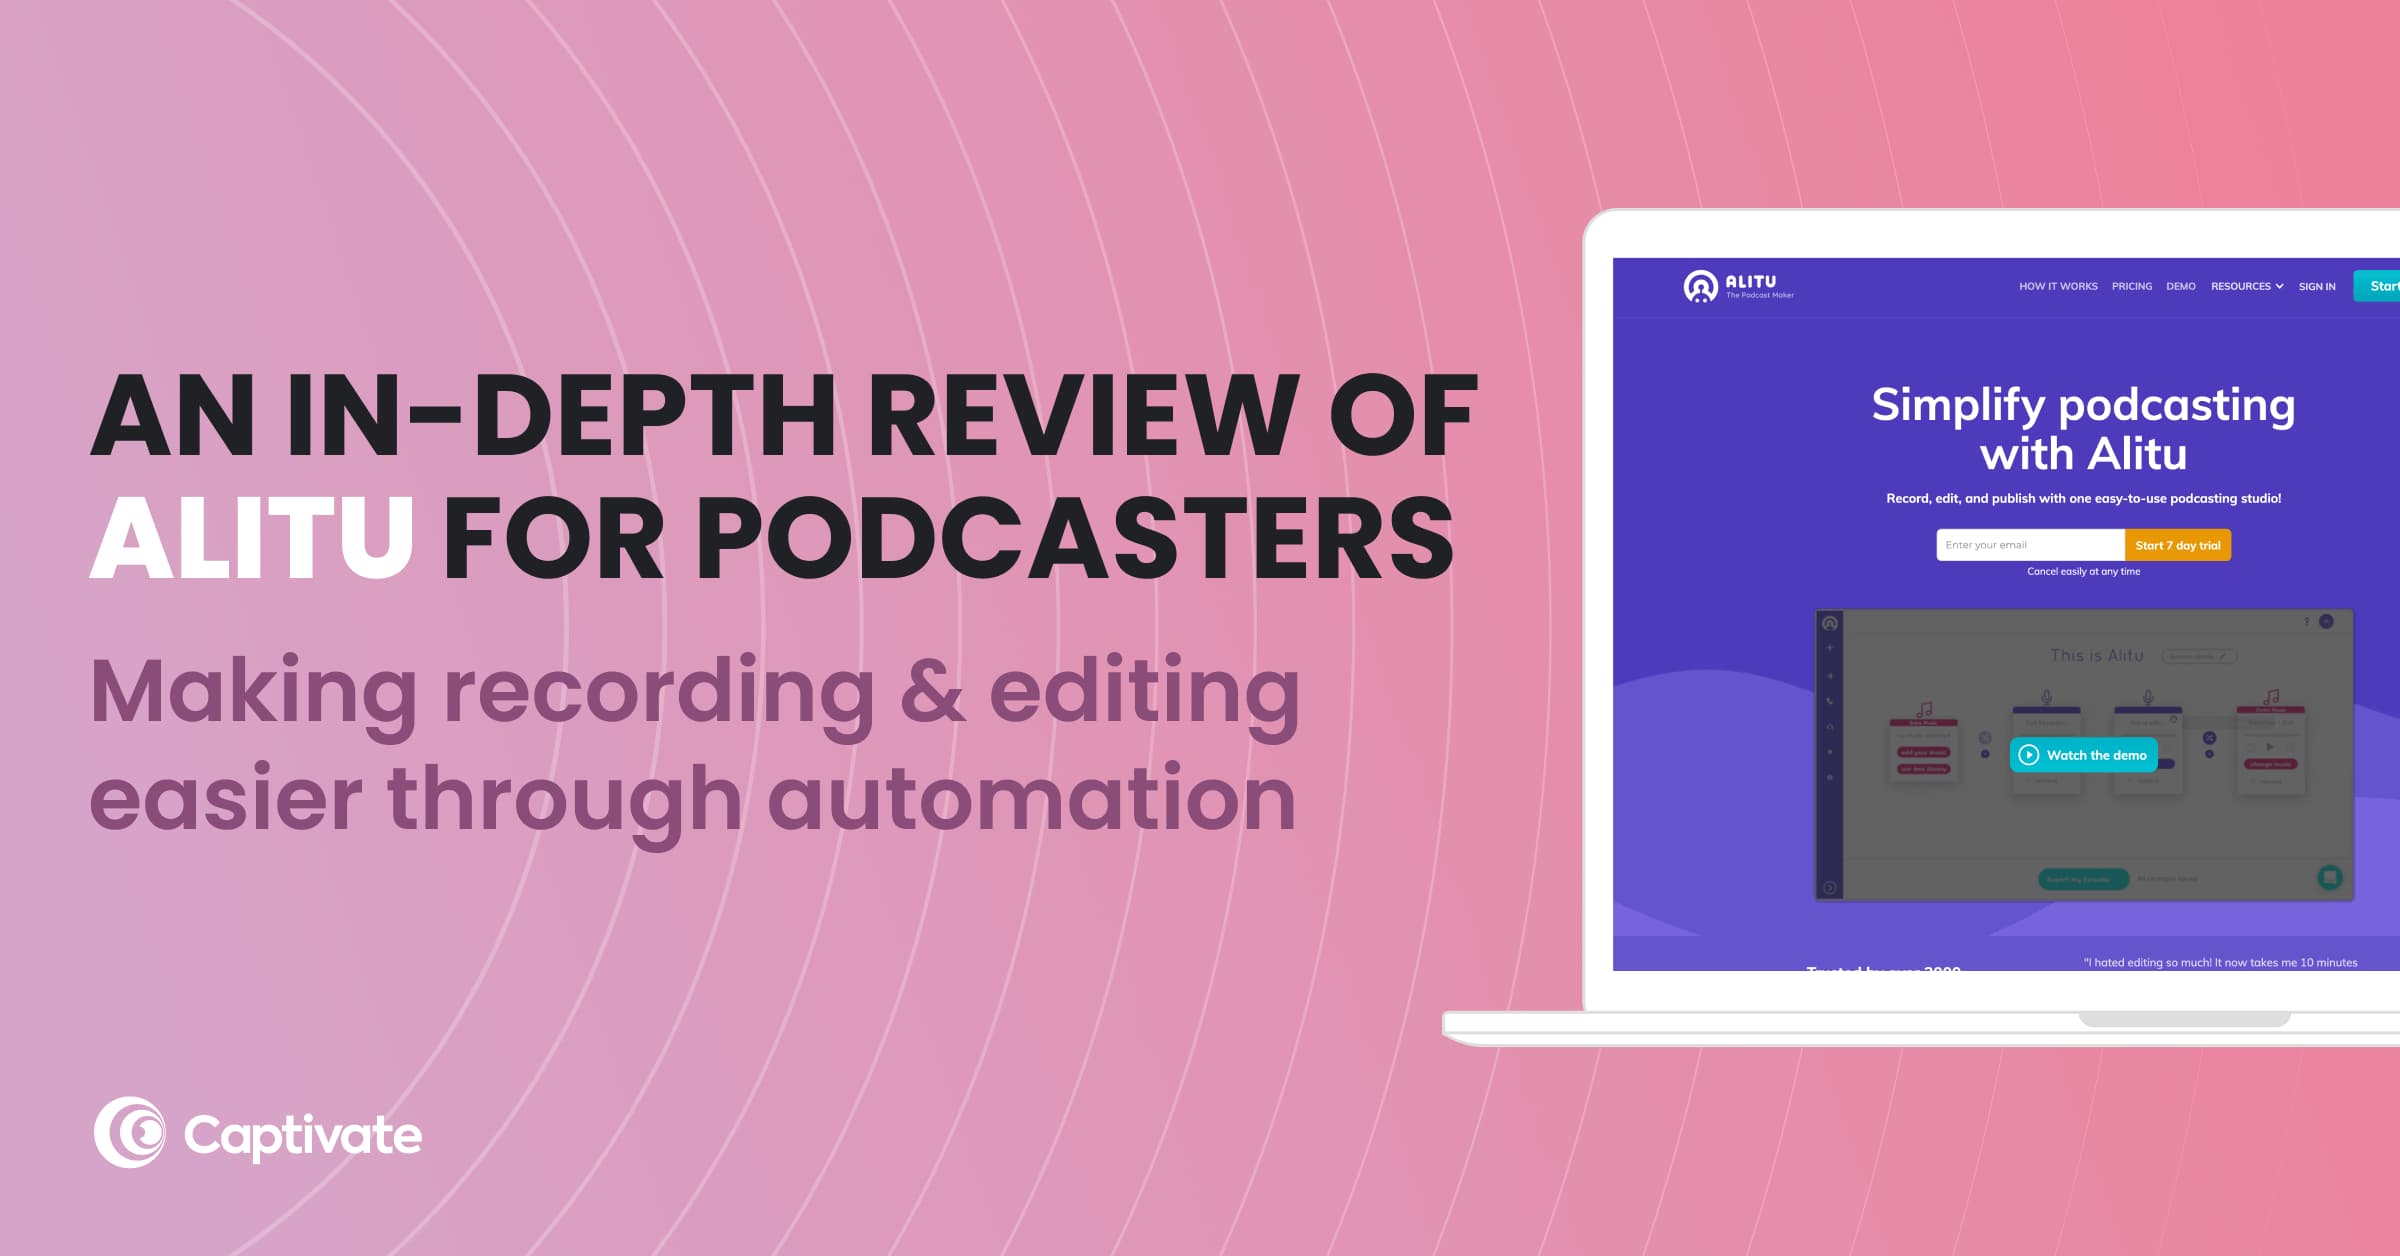 alitu review for podcasters blog feature image